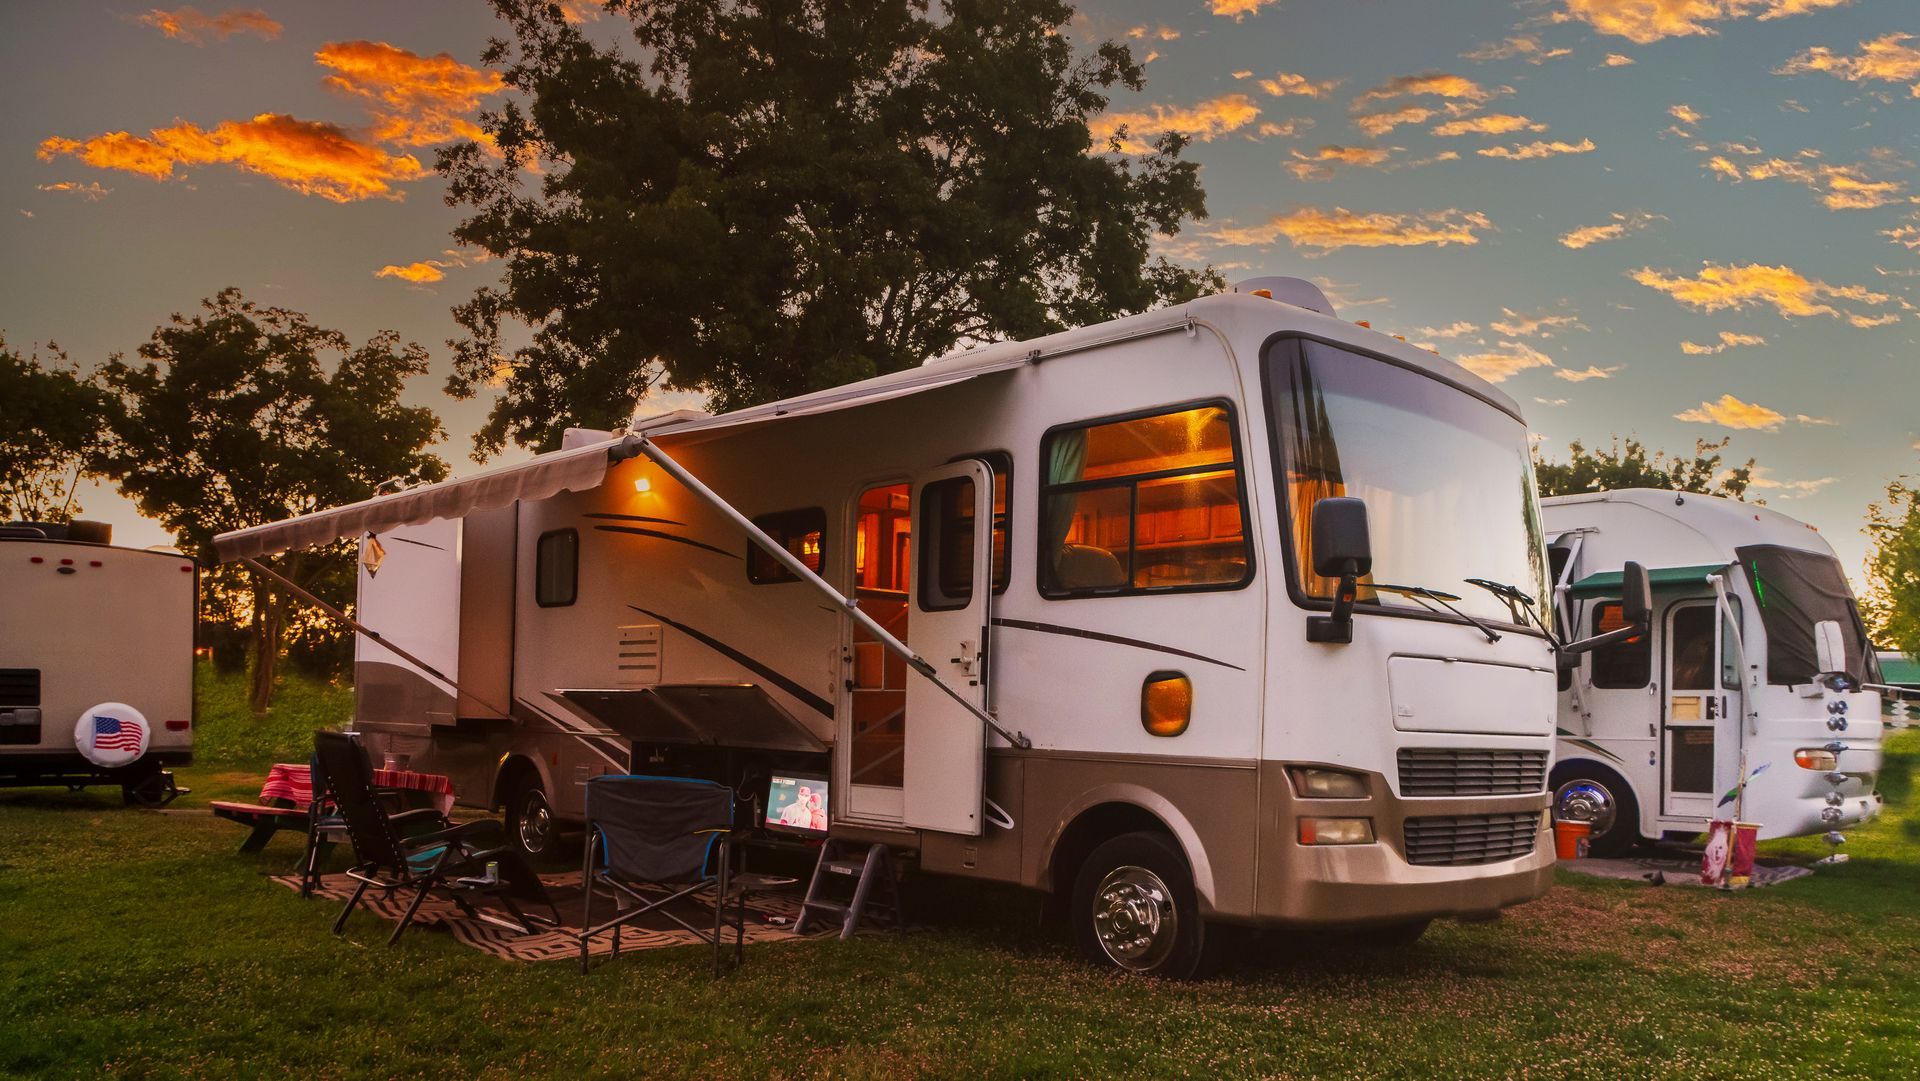 A large RV in a campground at sunset